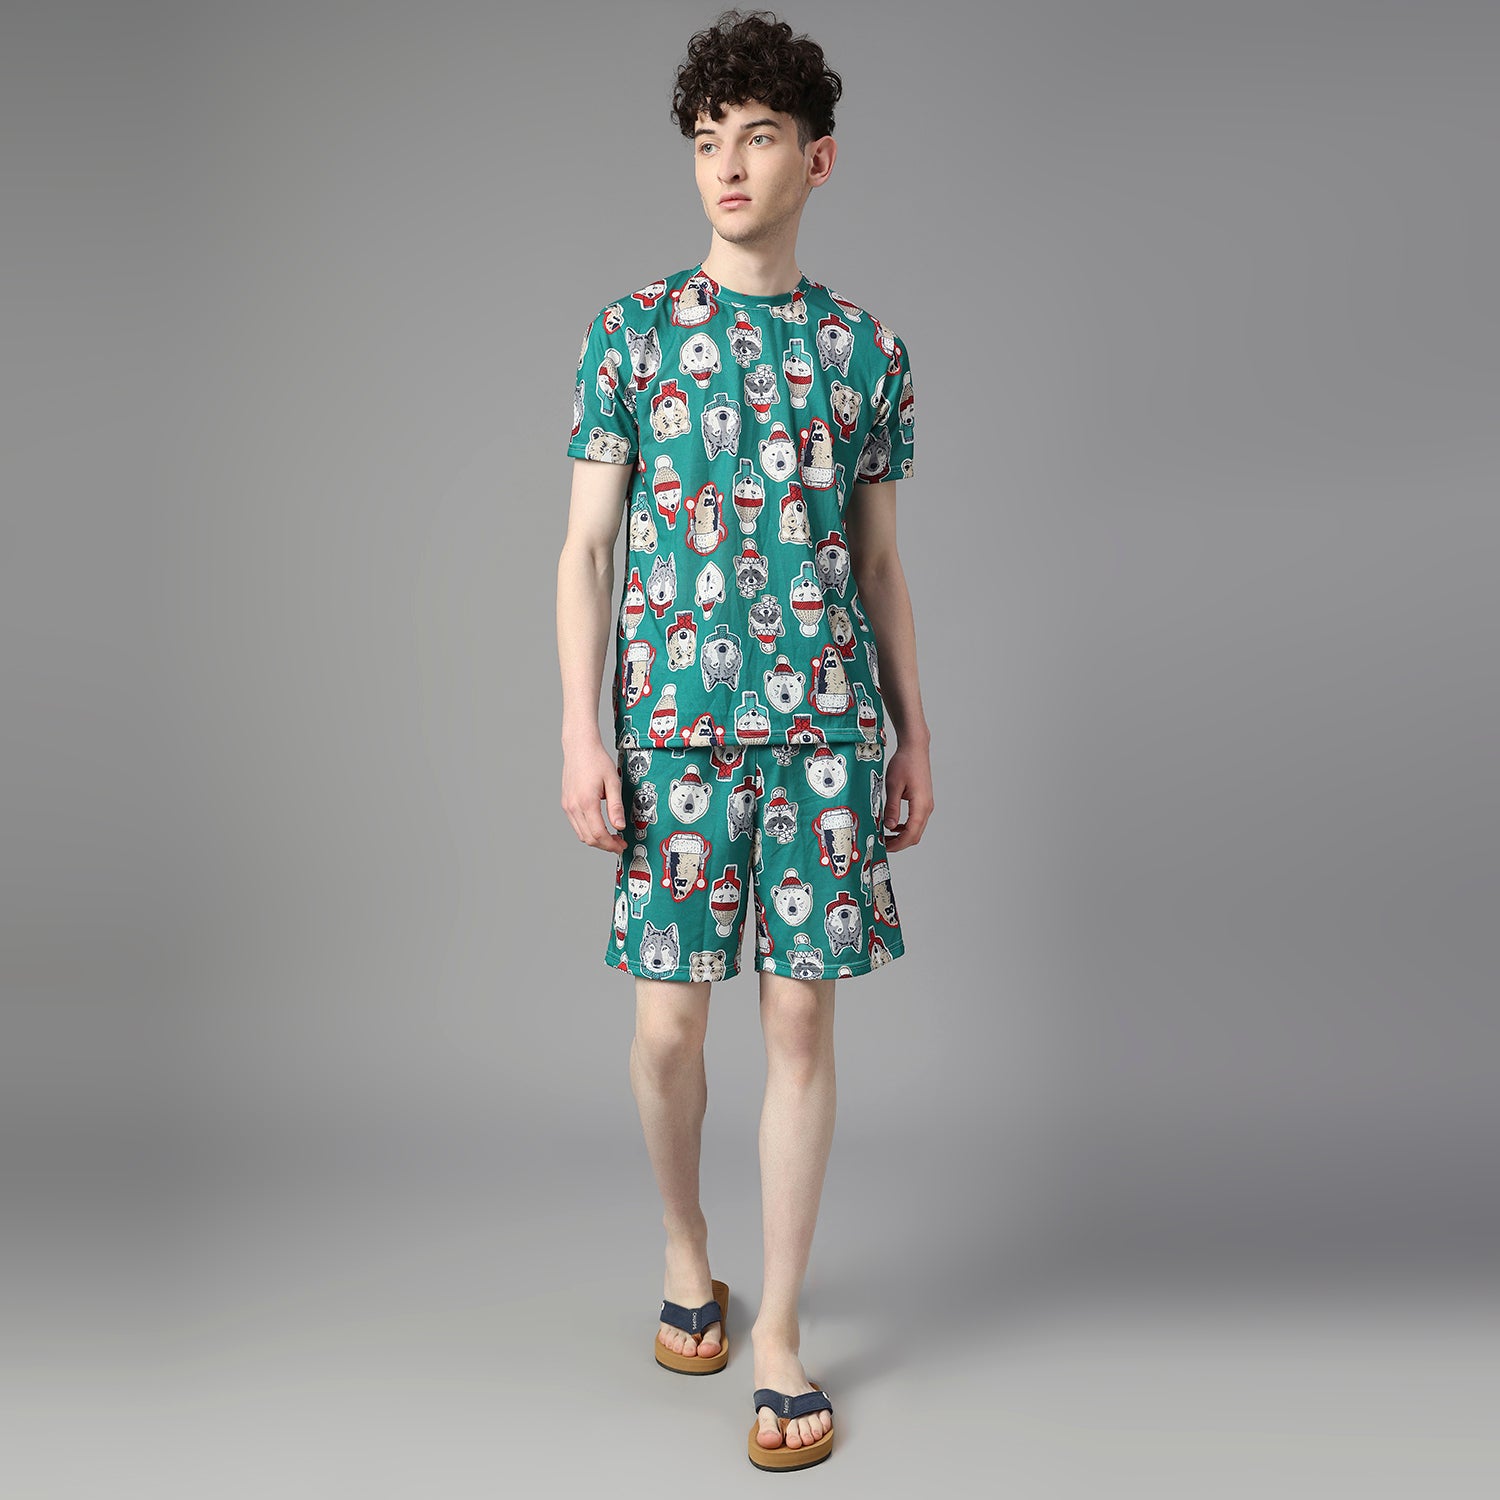 Men's Green Graphic Printed Co-ords